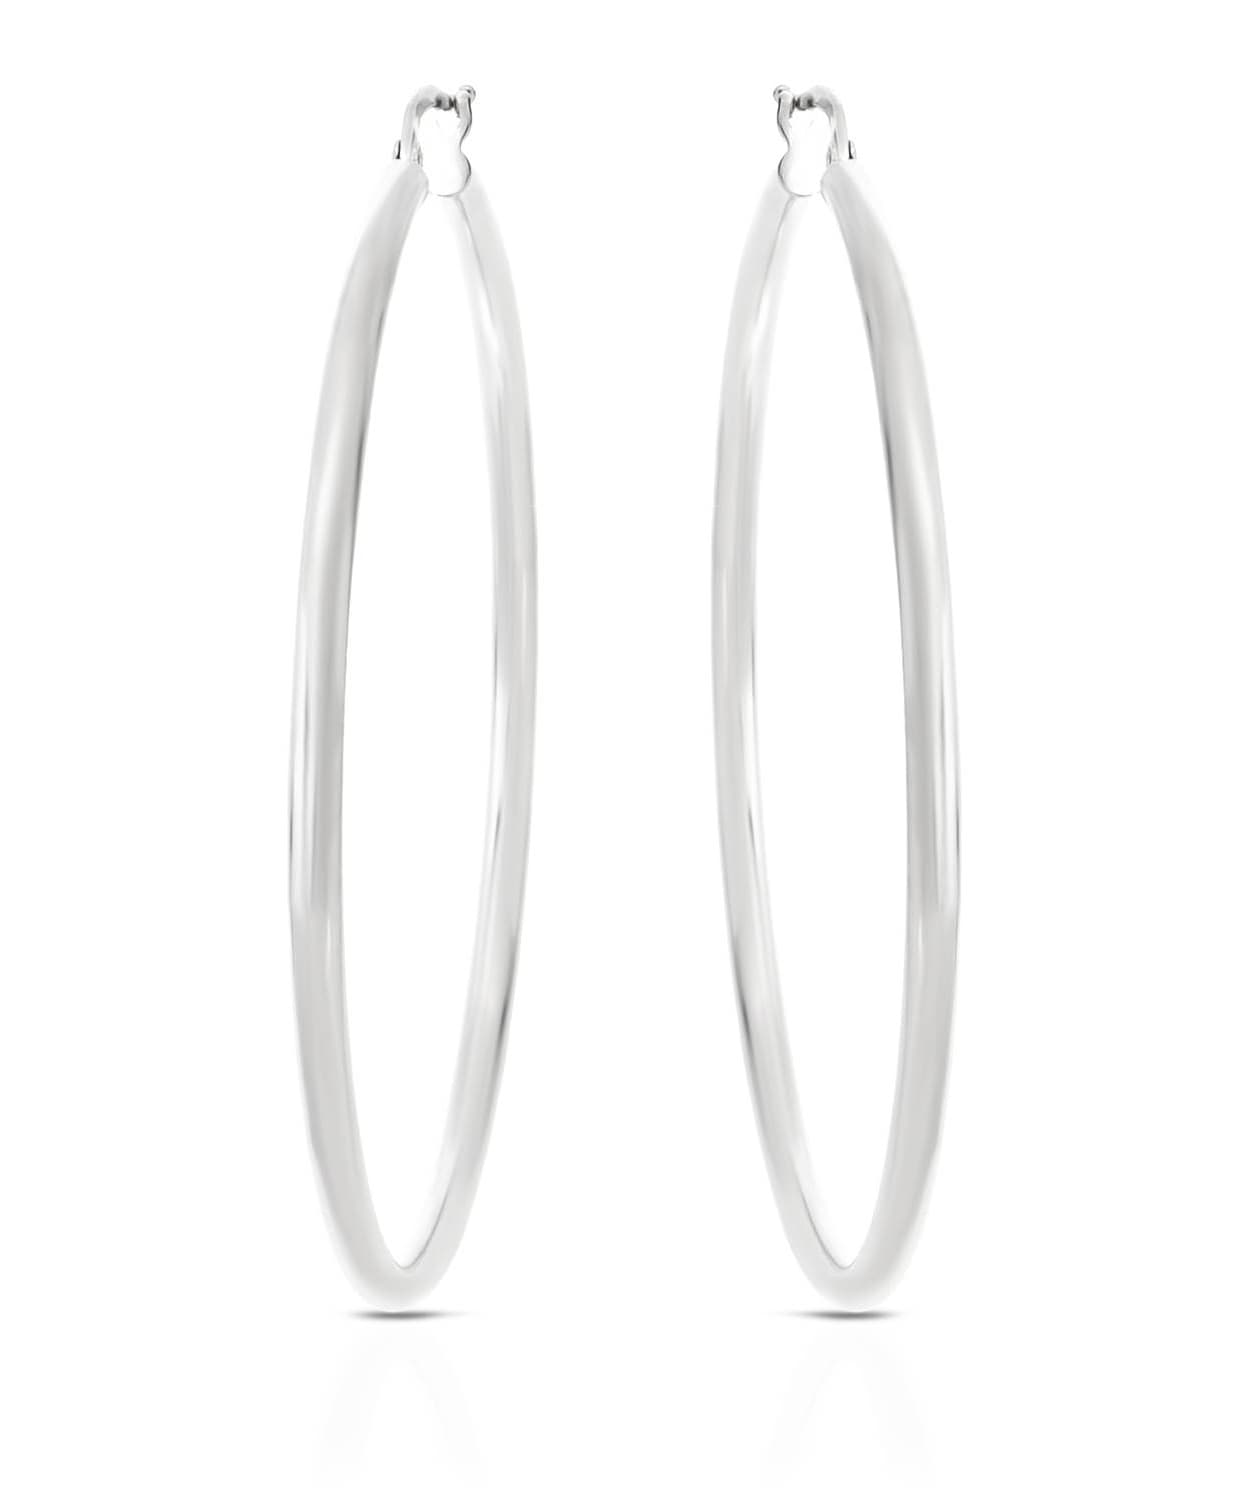 55mm Large 14k White Gold Classic Hoop Earrings View 1